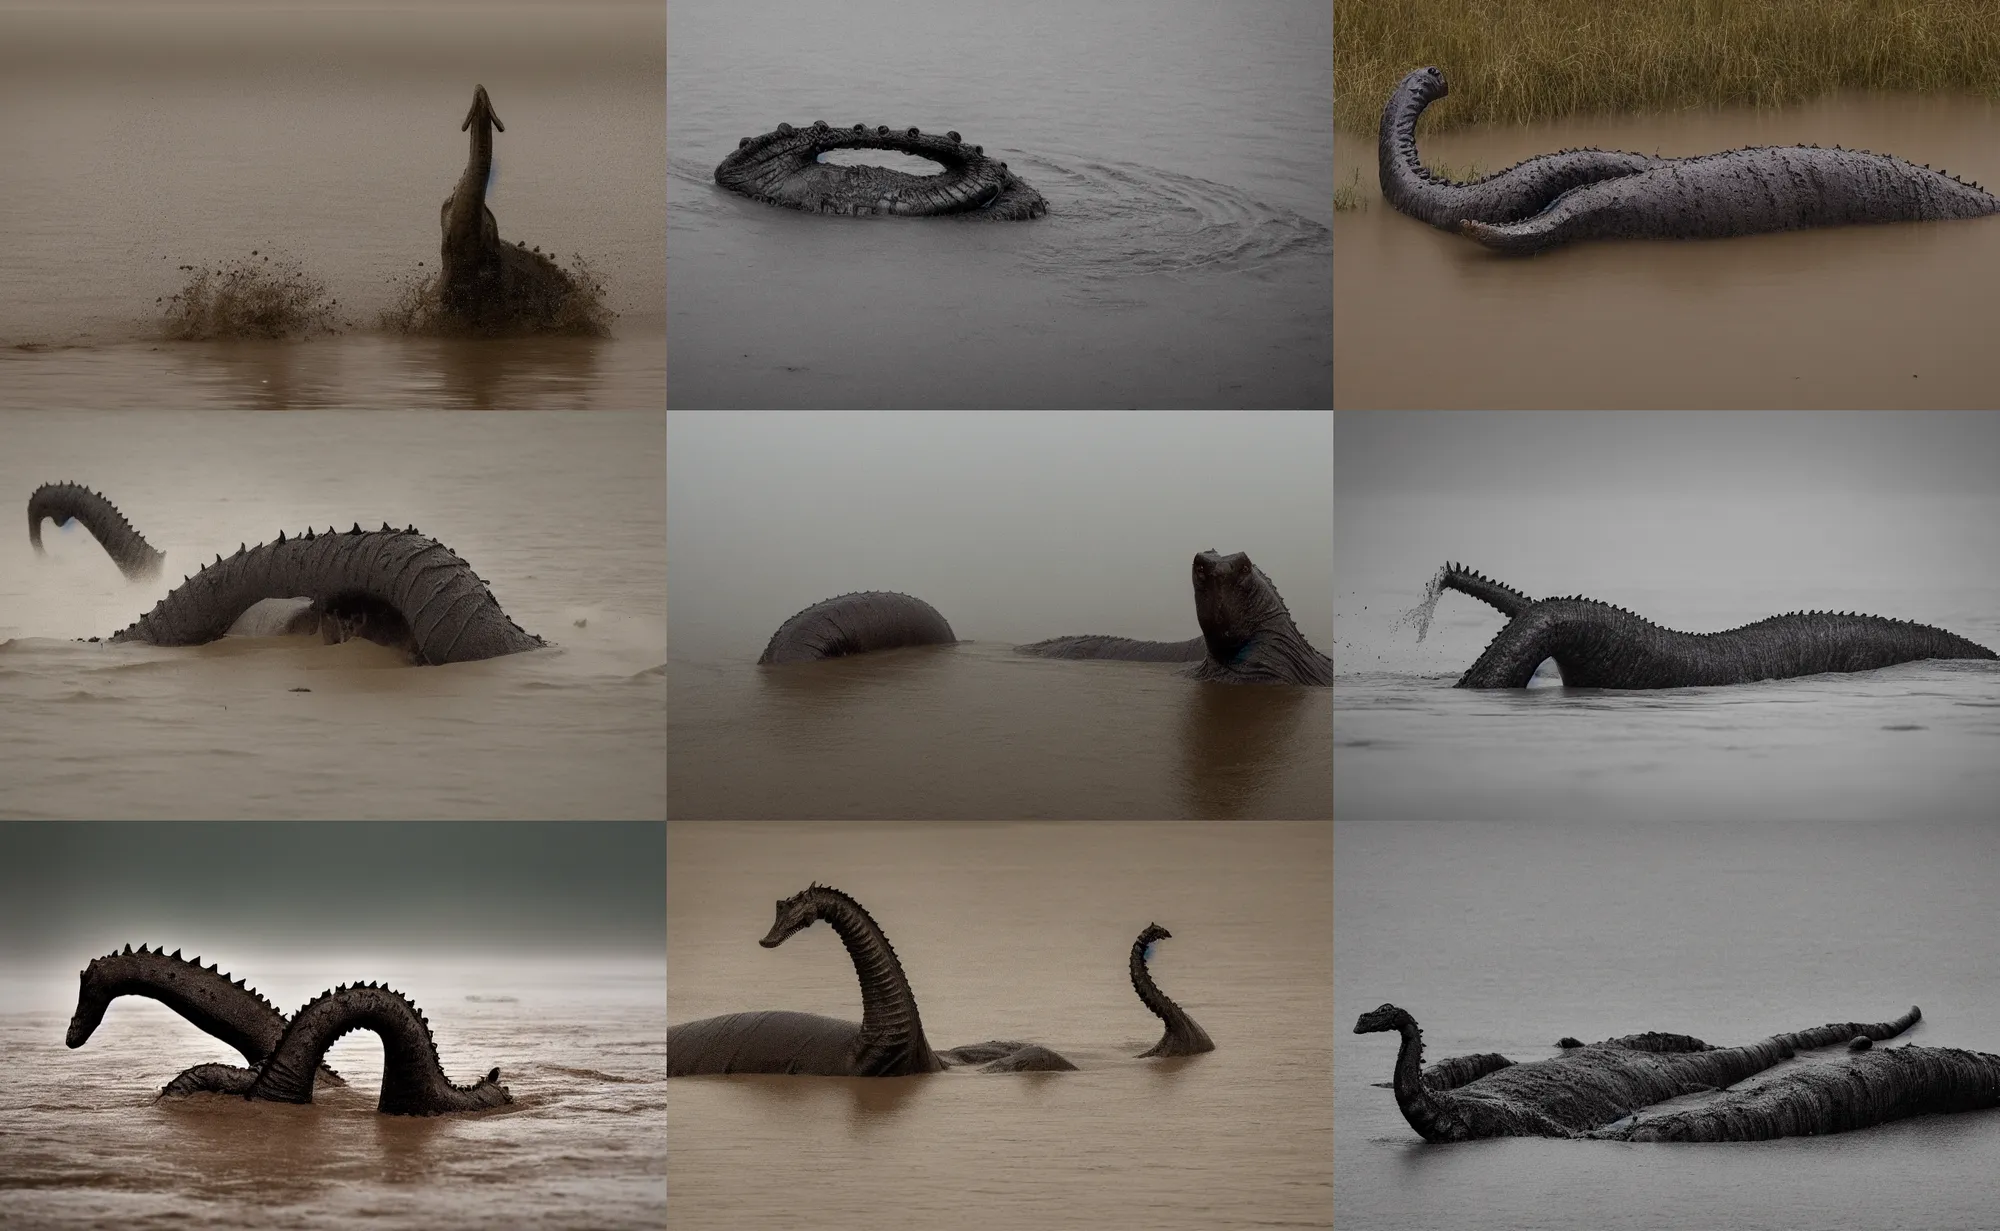 Prompt: nature photography of the loch ness monster in flood waters, african savannah, rainfall, muddy embankment, fog, digital photograph, award winning, 5 0 mm, telephoto lens, national geographic, large eyes